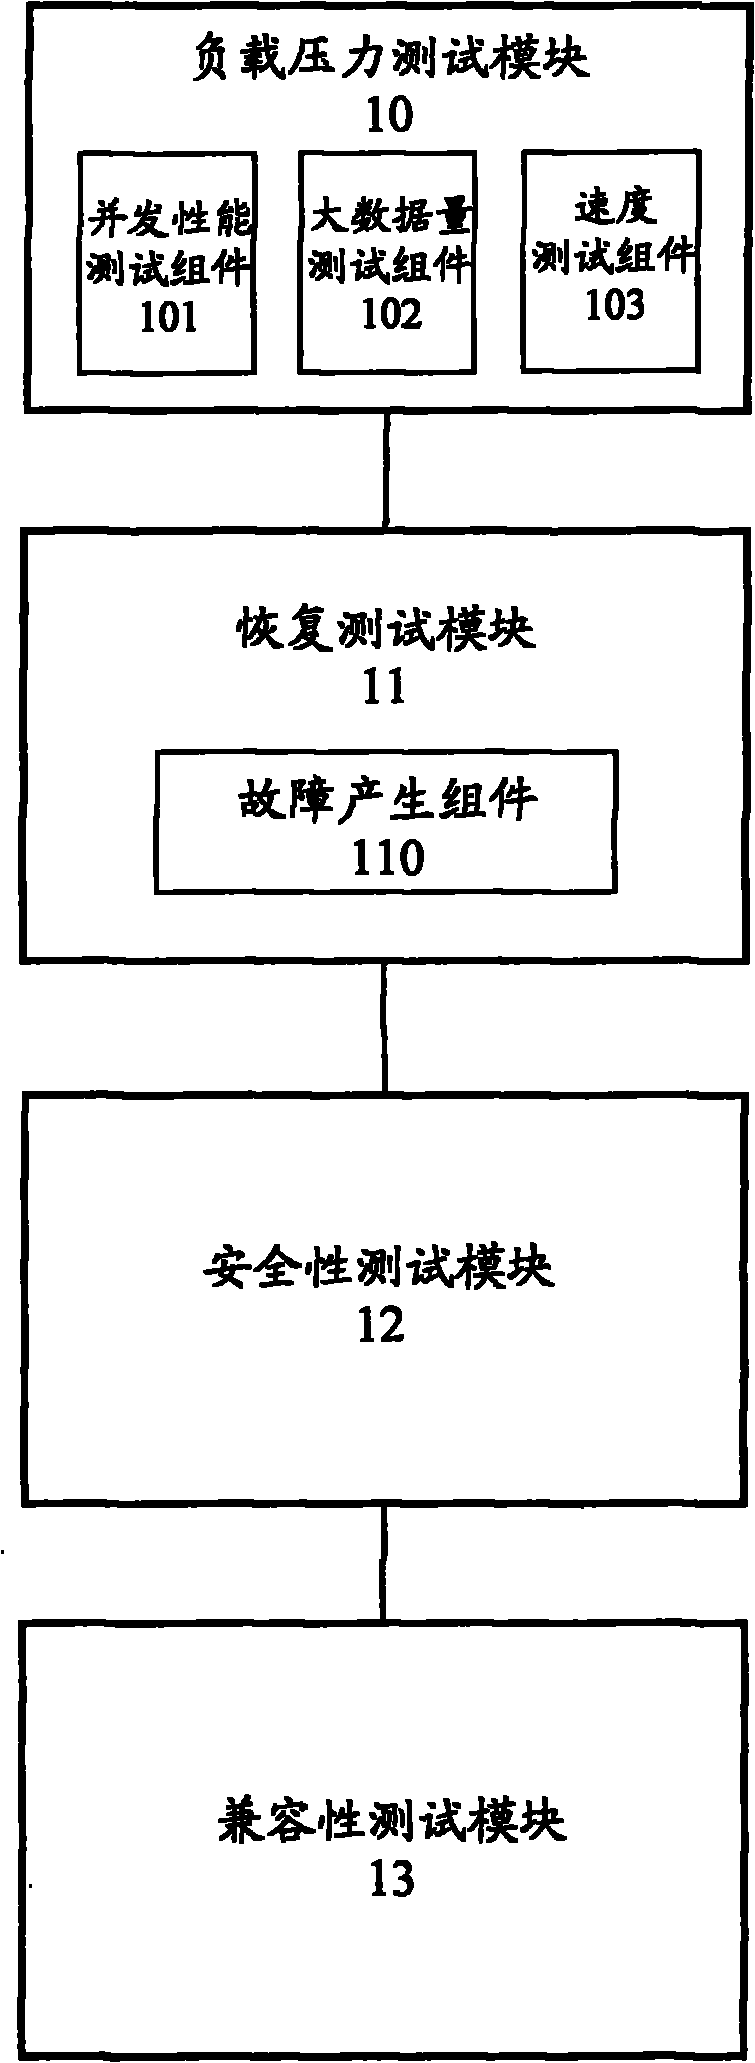 Auxiliary testing device for software system